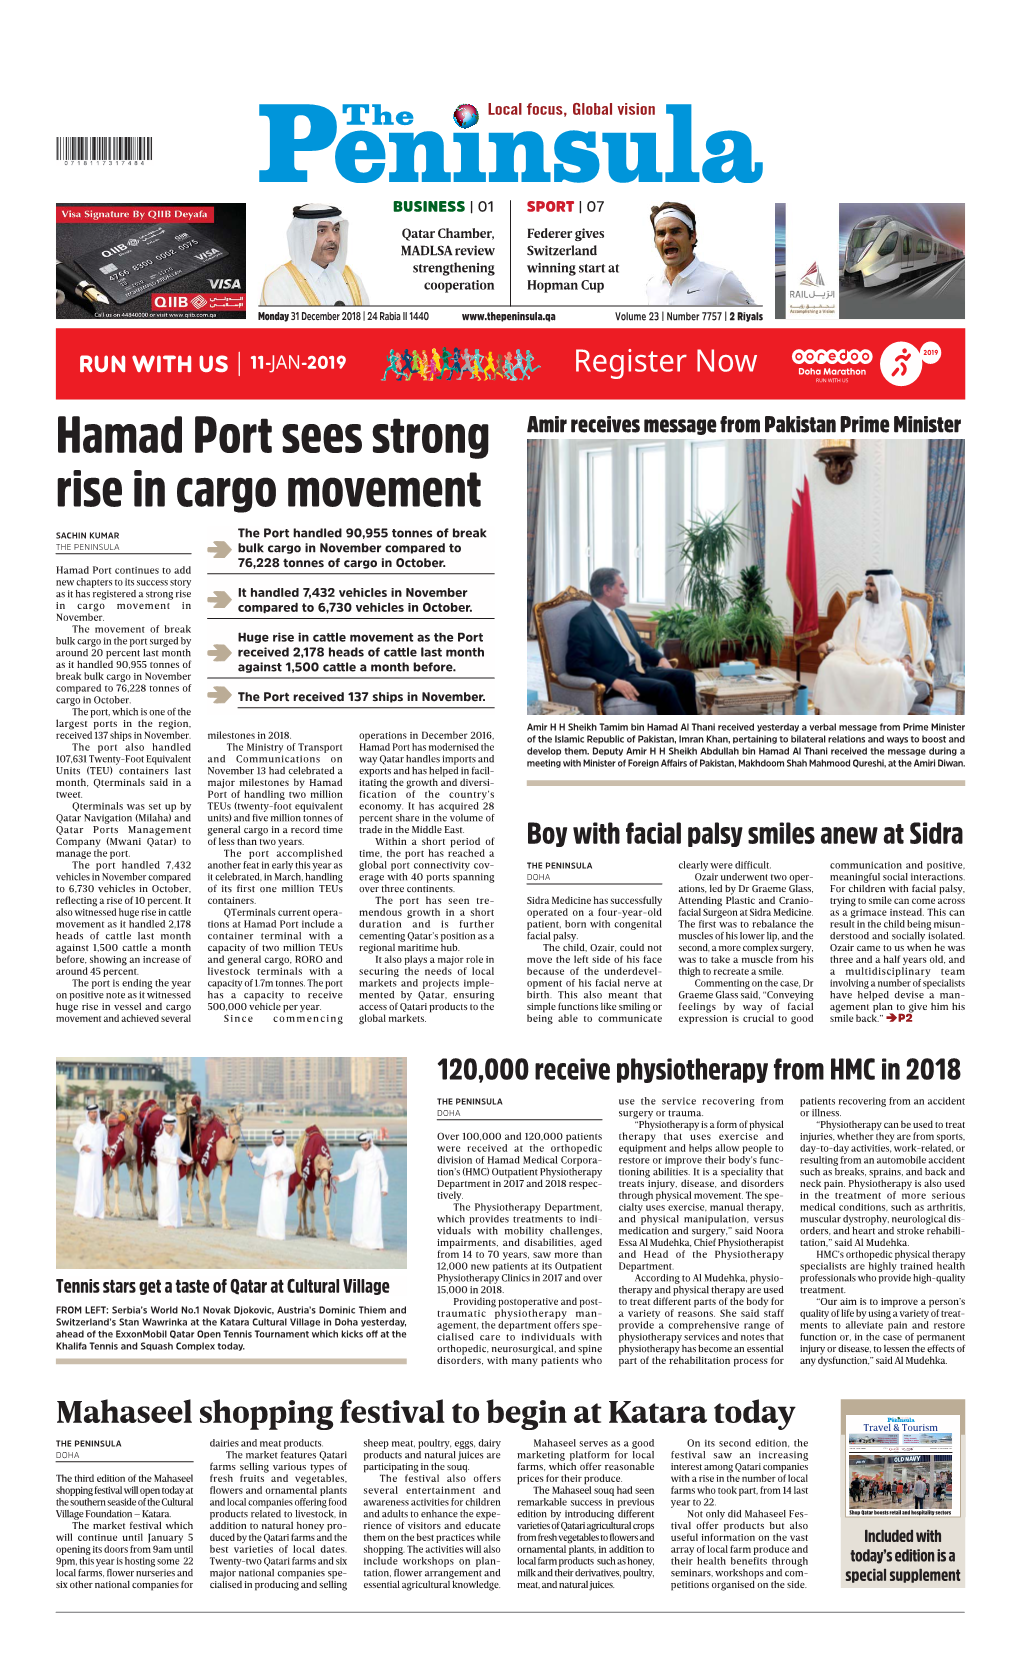 Hamad Port Sees Strong Rise in Cargo Movement